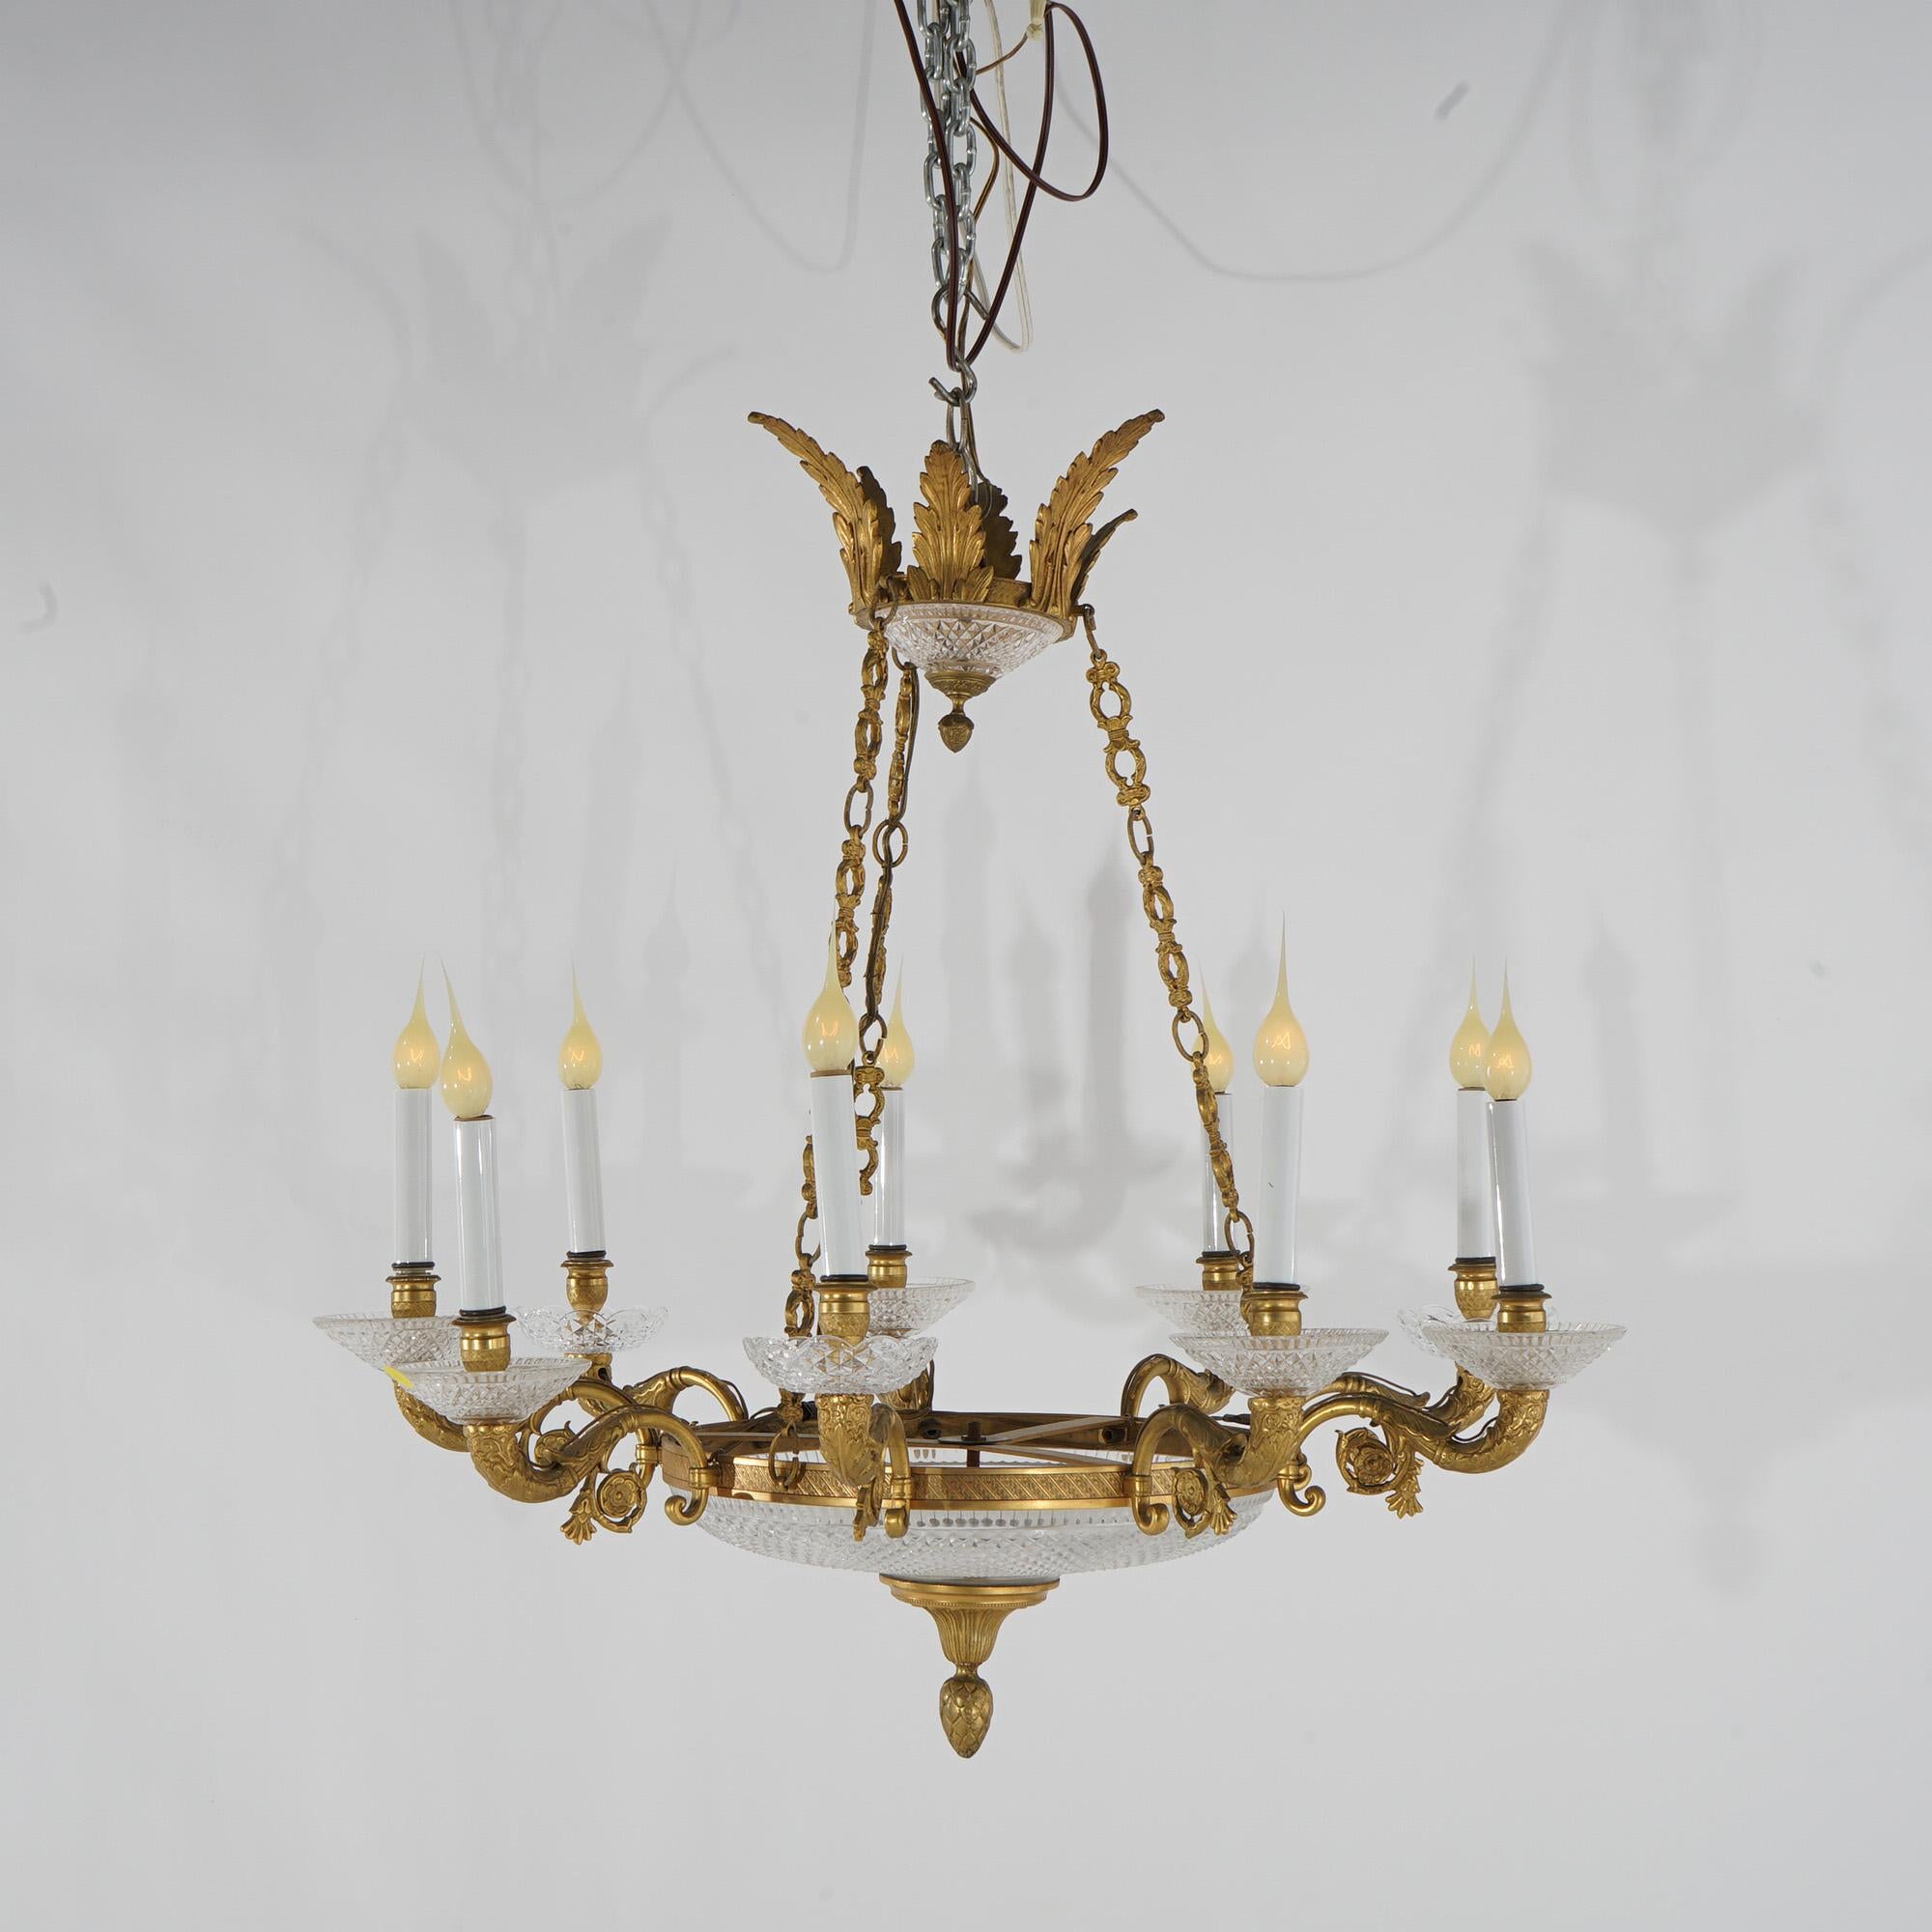 ***Ask About Reduced In-House Delivery Rates - Reliable Professional Service & Fully Insured***

Antique French Louis XIV Style Gilt Bronze & Crystal Nine-Light Chandelier with Foliate Elements, c1910

Measures - 37